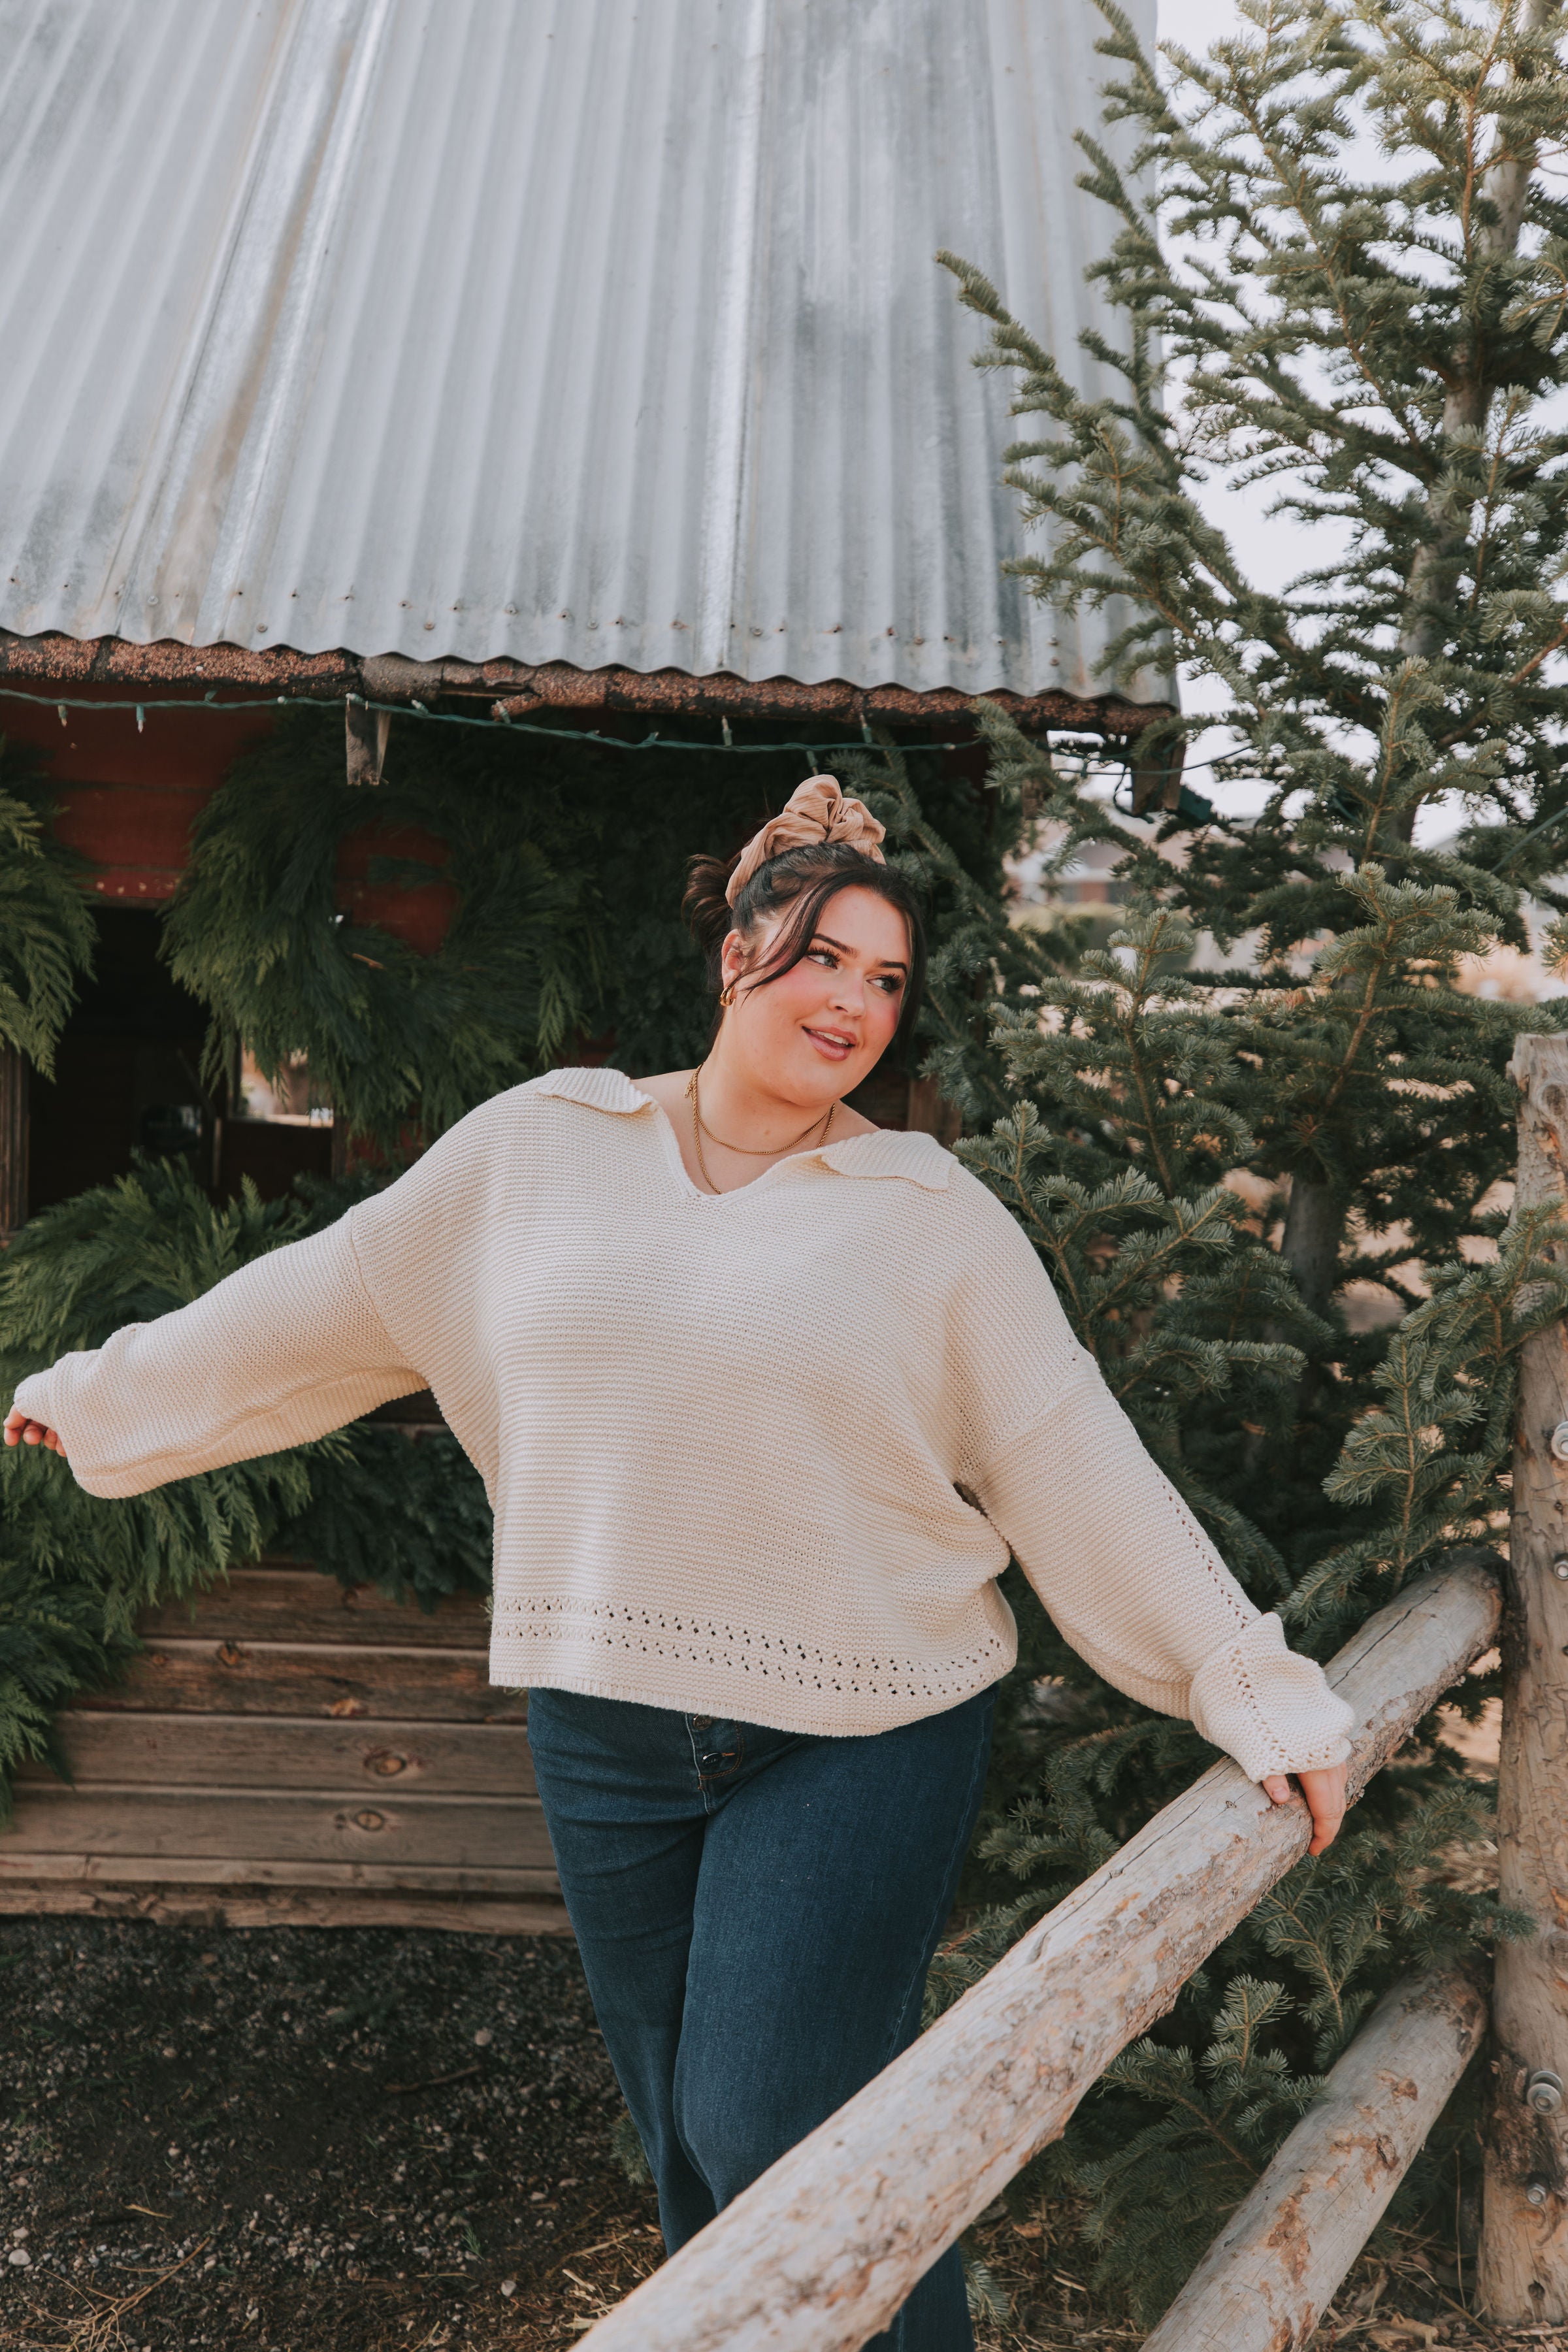 PLUS SIZE - By My Side Sweater